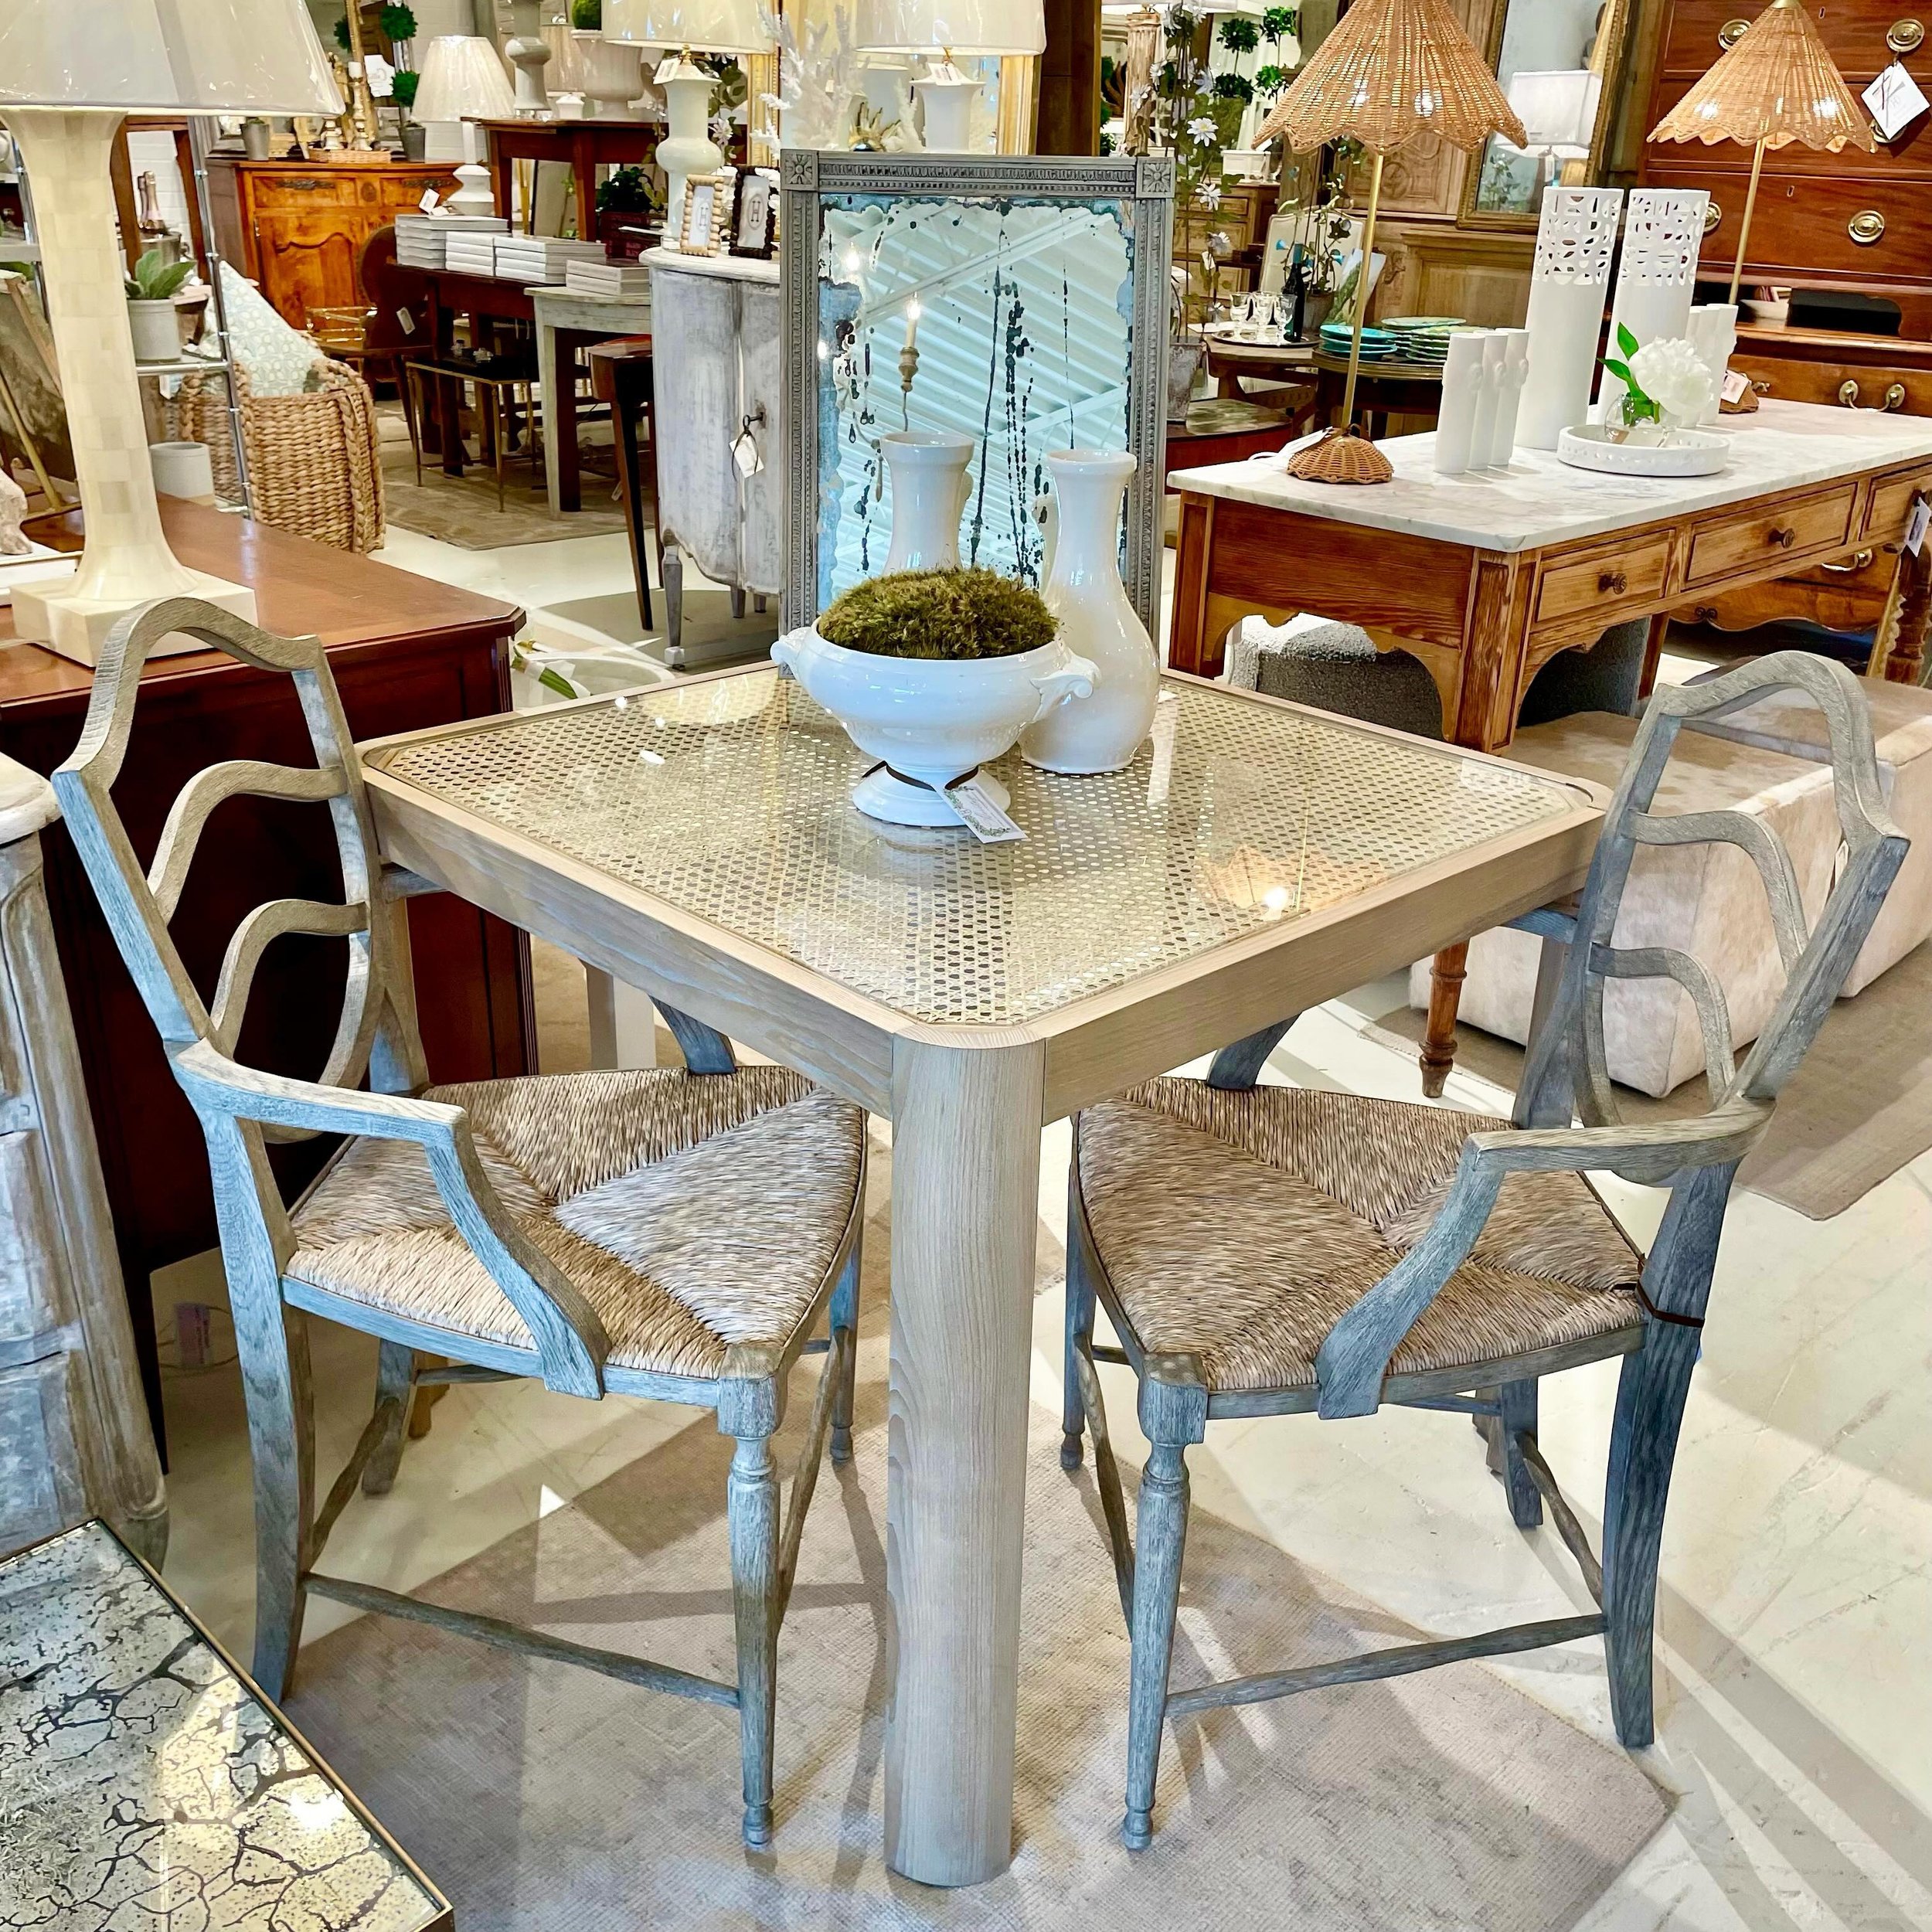 Back in stock today&mdash;one of our favorite game tables! We have this one and several other great game tables currently in the shoppe. And these great @williamyeoward chairs make the perfect complement. #heritageclt #curateddecor #europeanantiques 